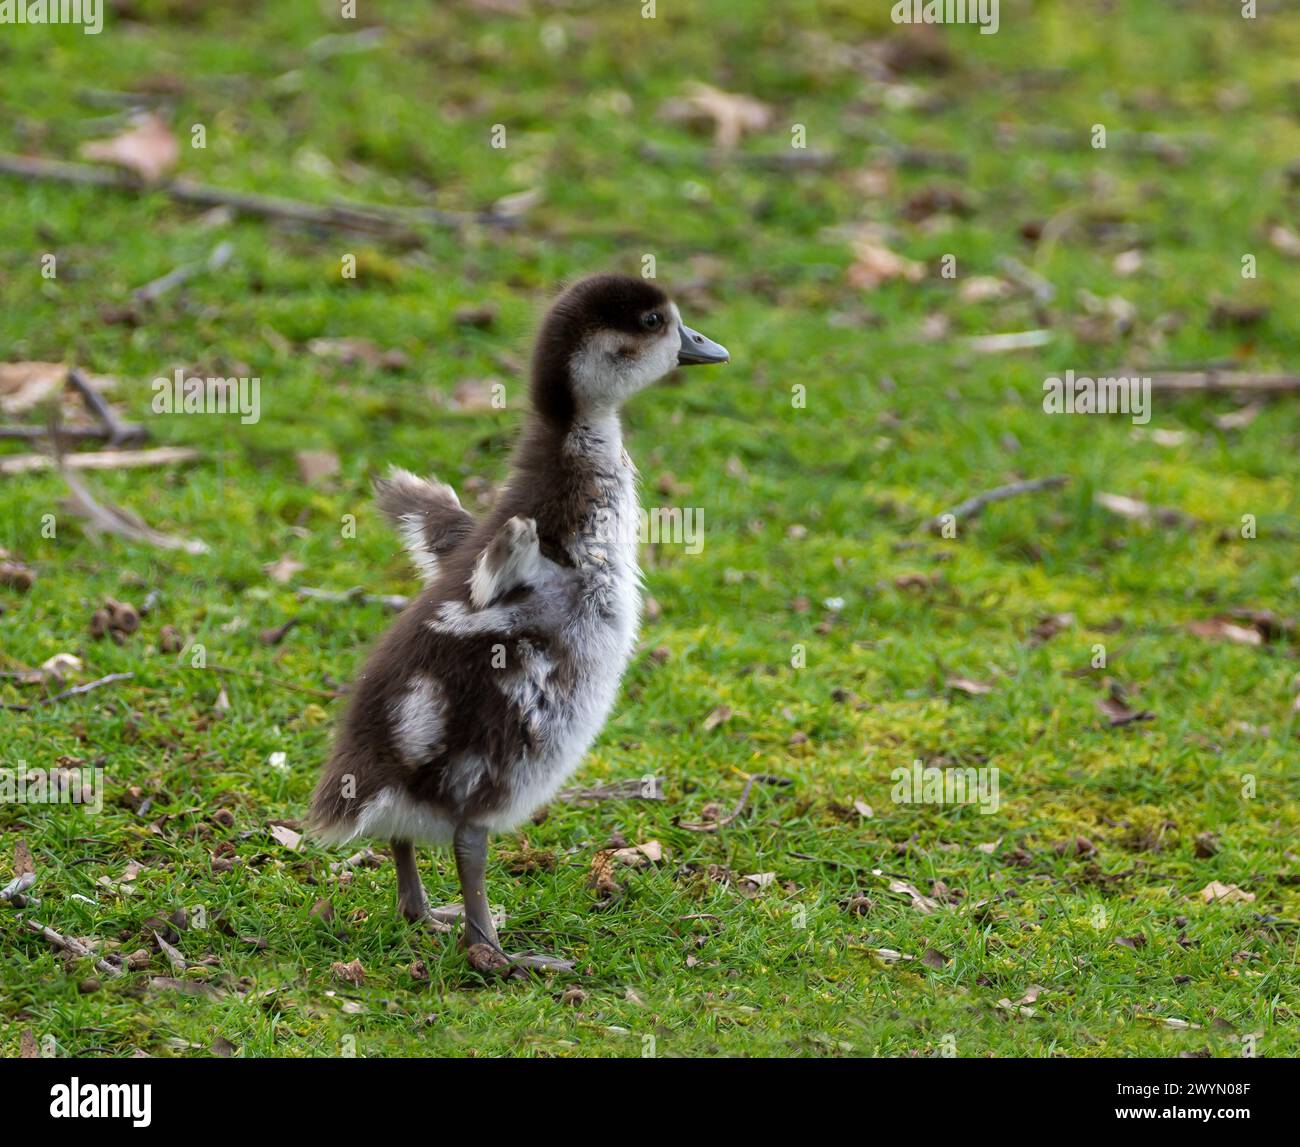 Cute and fluffy Egyptian Goose Gosling Standing Tall and Flapping Wings Stock Photo